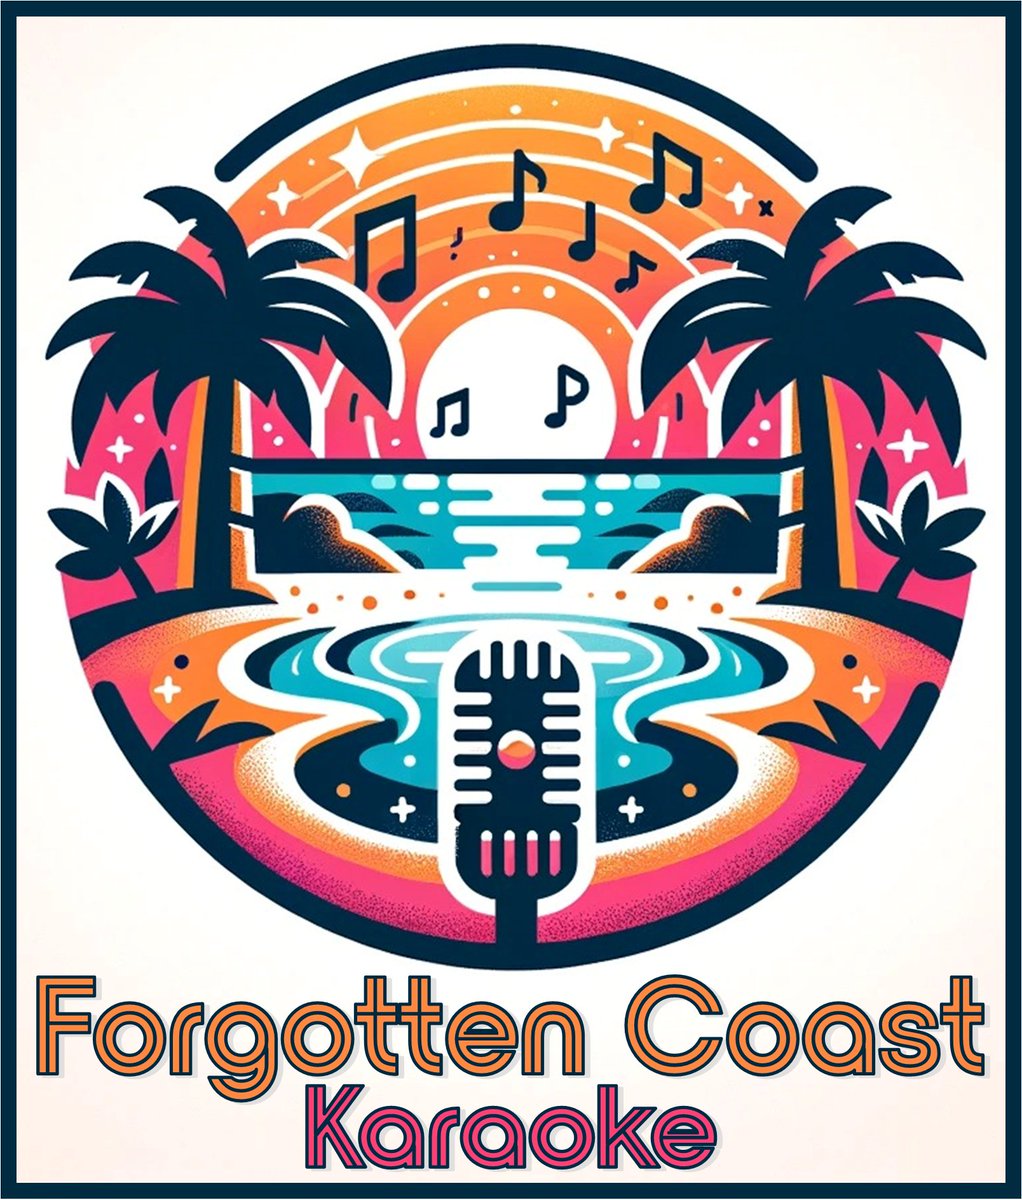 🎤🌟 Ready to be a star? Join us at Taproot Bar for Forgotten Coast Karaoke Night! Sing your heart out, enjoy great drinks, and make unforgettable memories. Whether you're a shower singer or a karaoke king or queen, we want to hear you! 🎵🍻 

#KaraokeNight #TaprootTunes